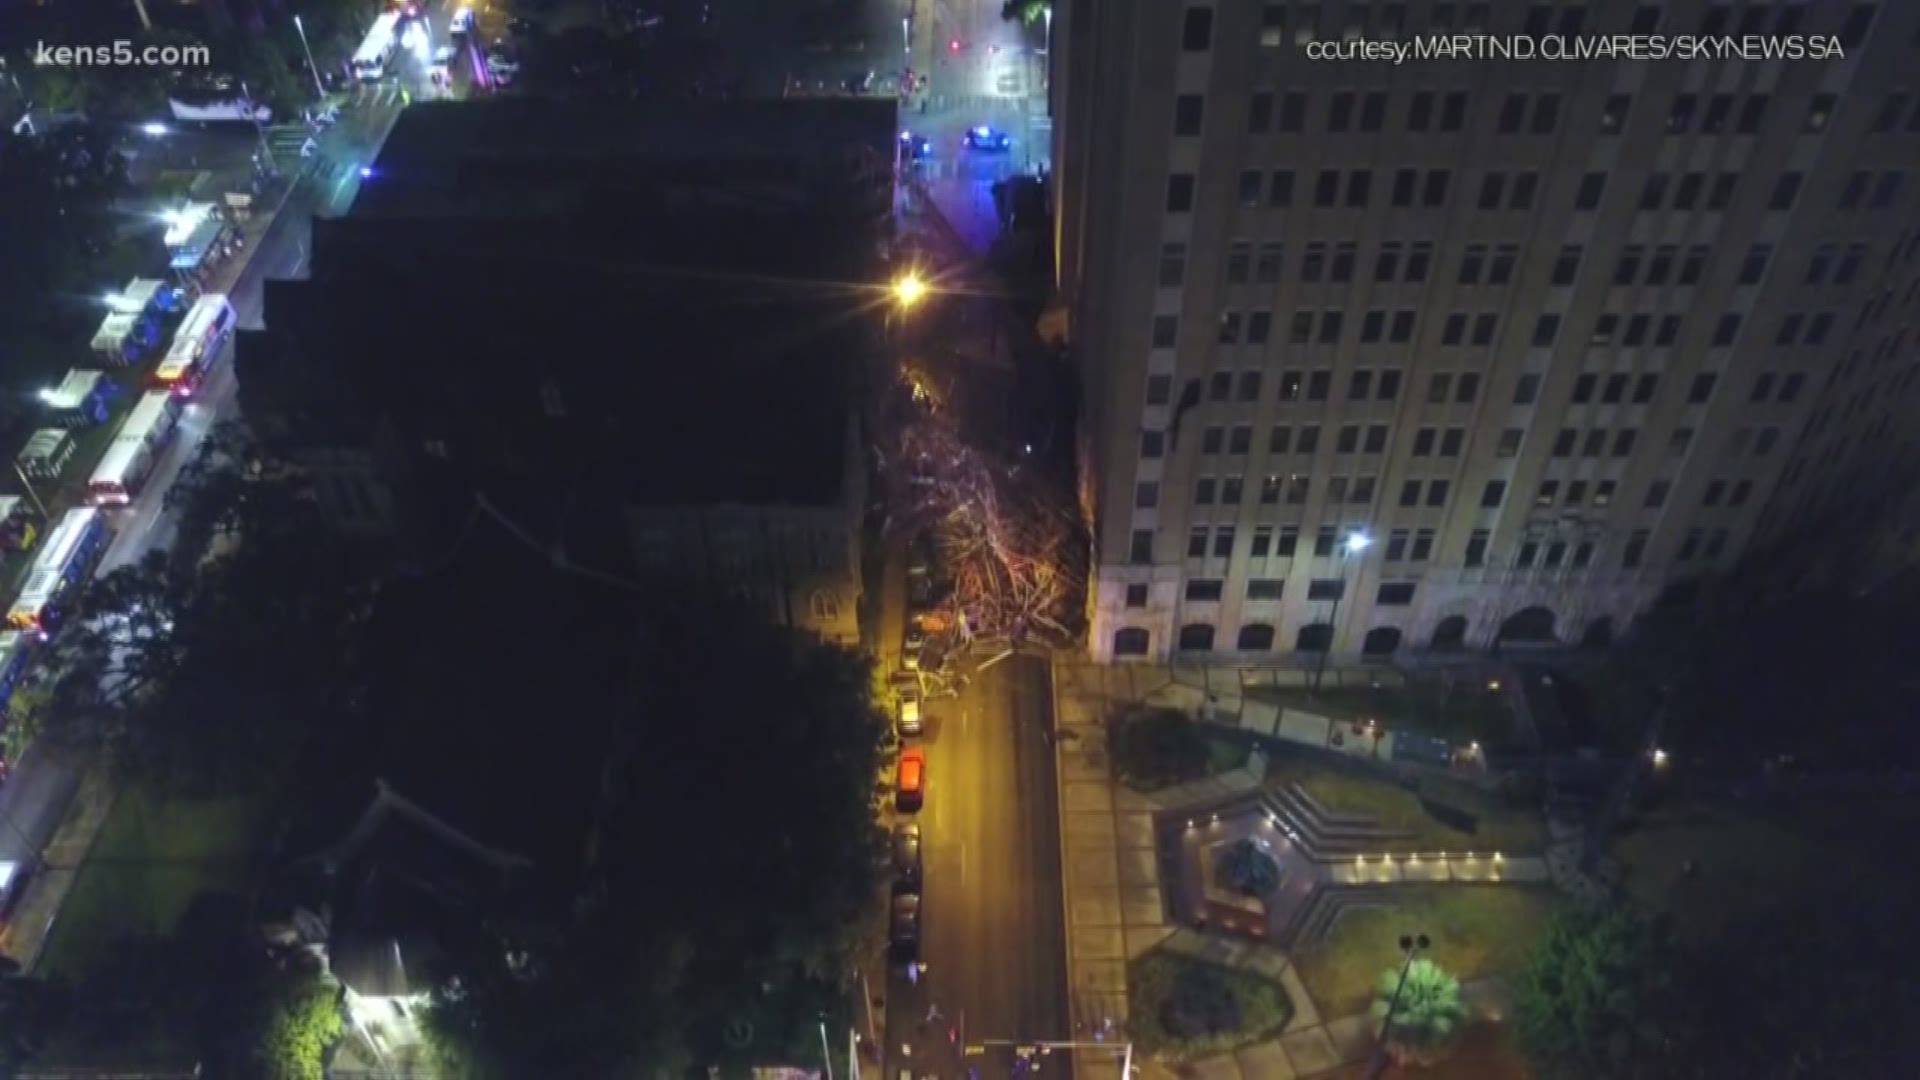 Clean up is underway after an overnight storm blew over a 100-foot scaffolding in downtown San Antonio.